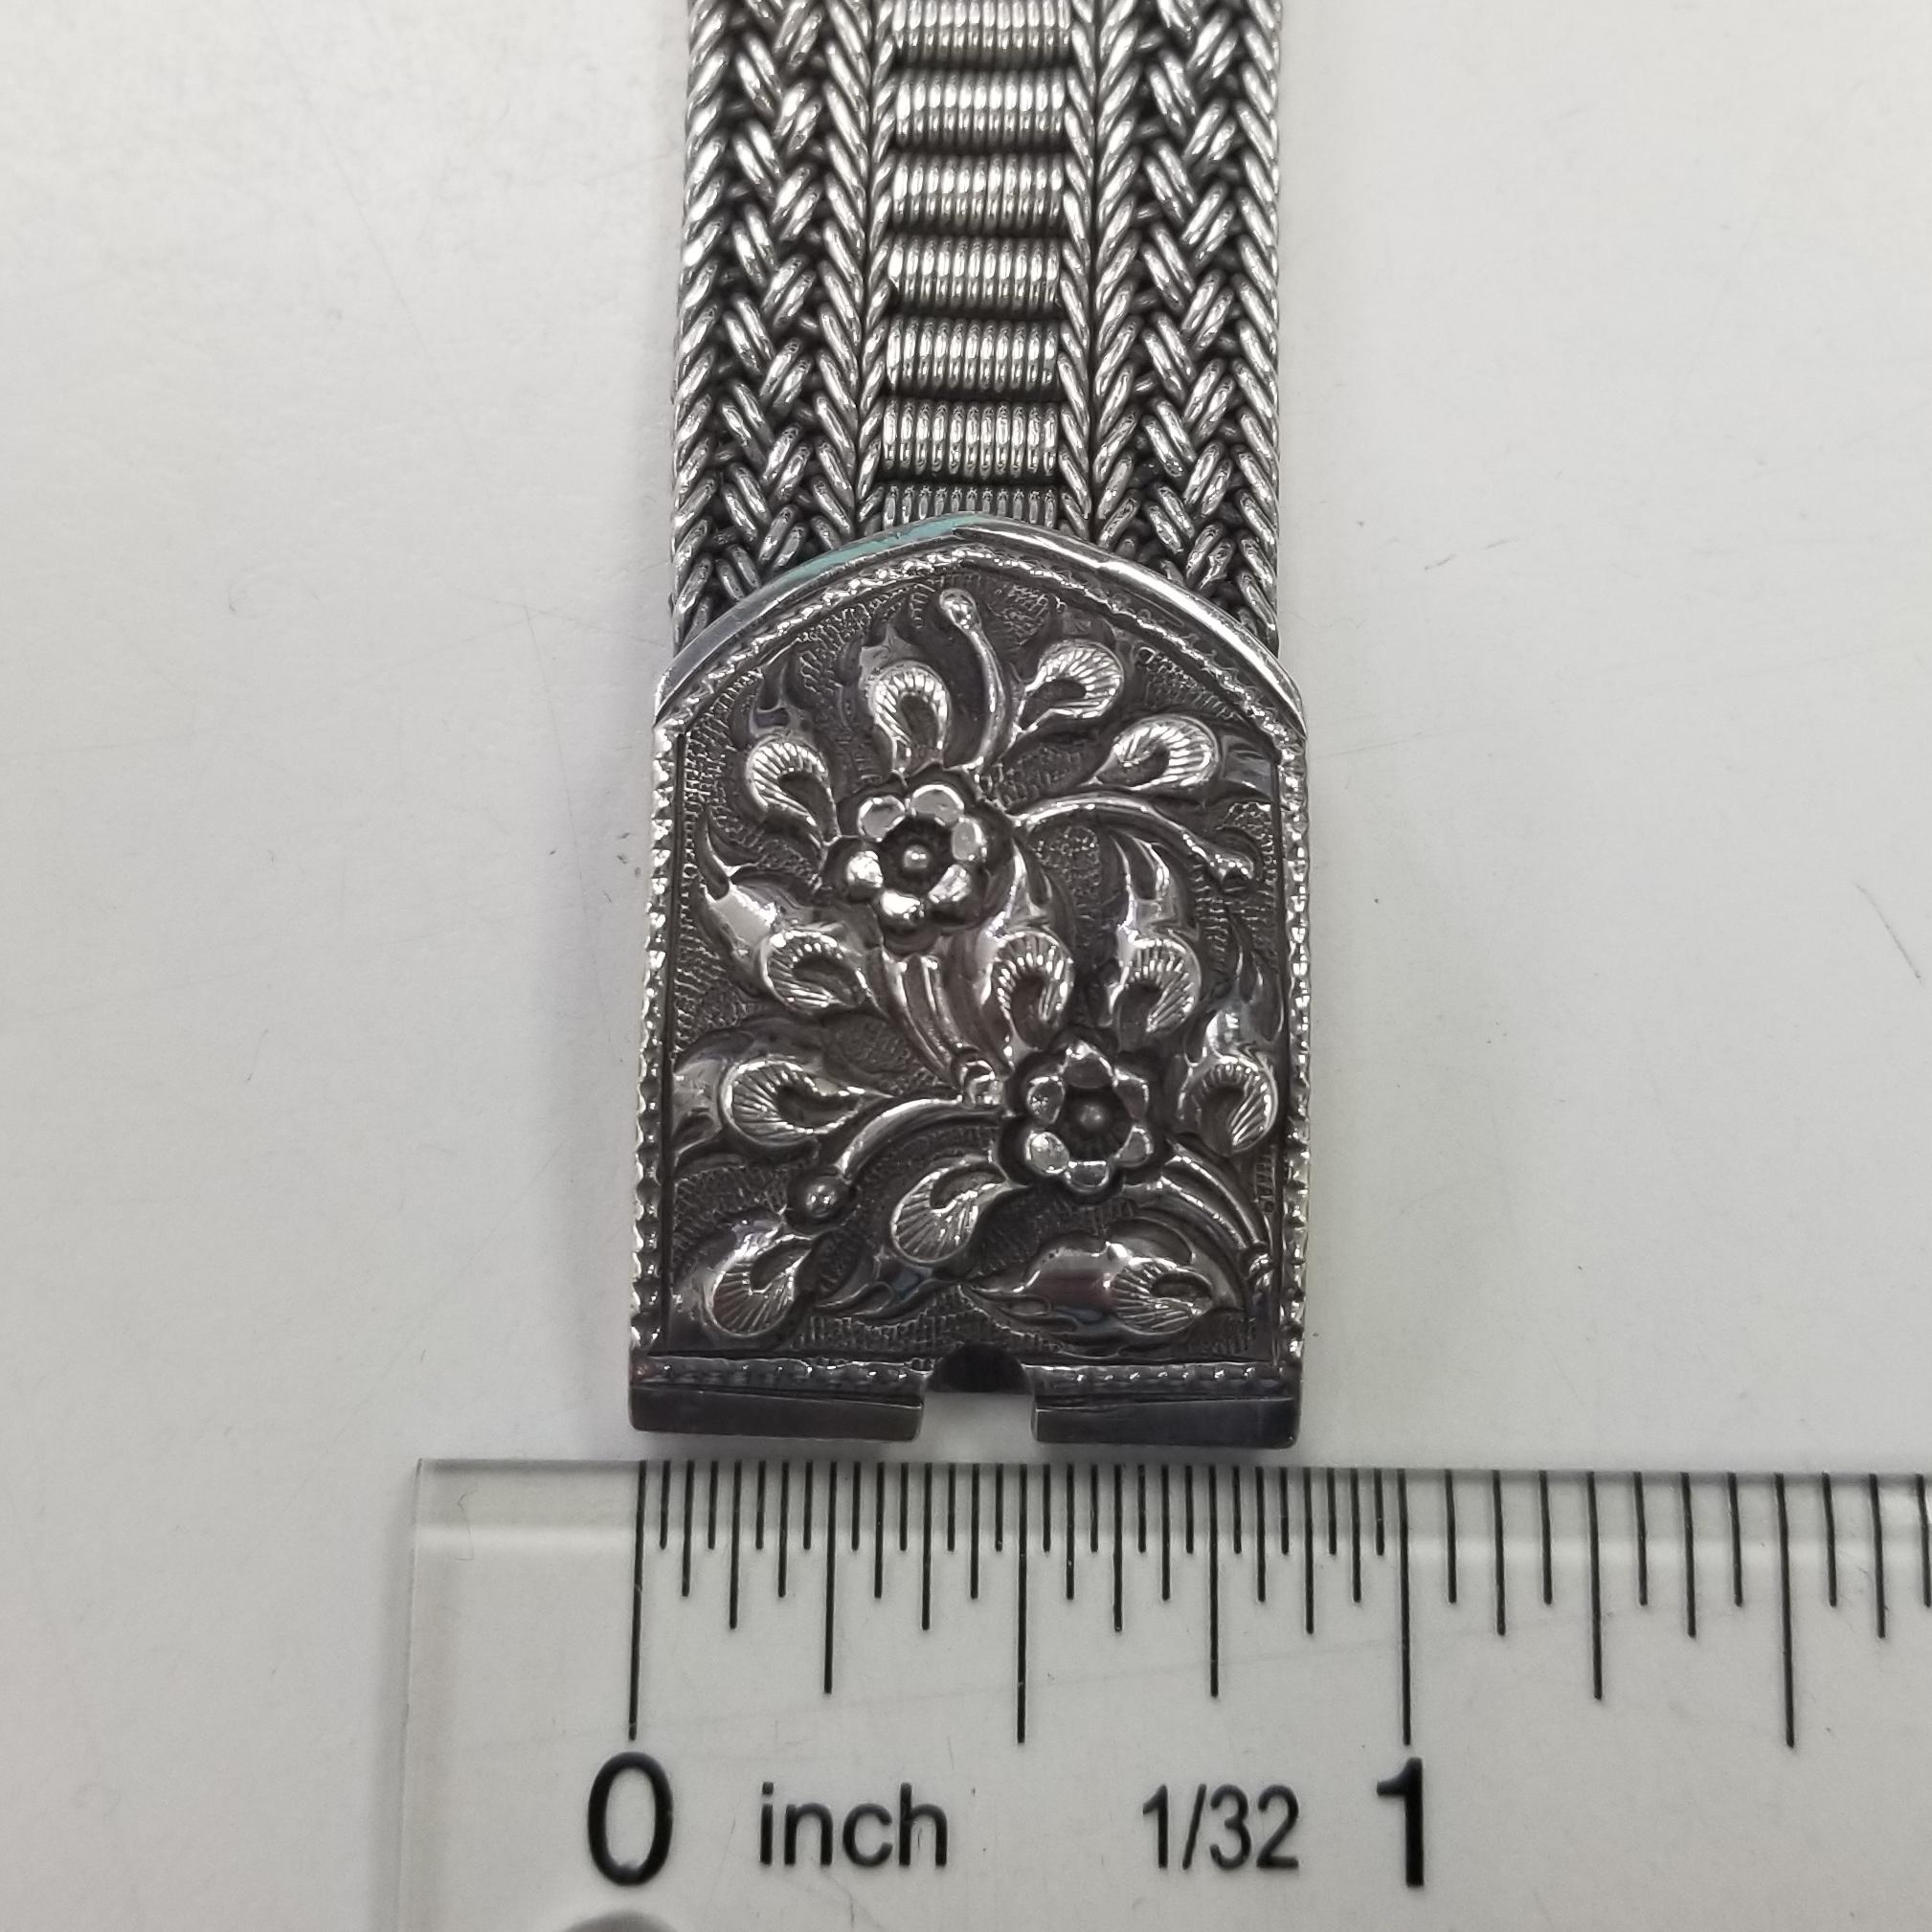 Contemporary Silver 3 row mesh bracelet with flower motif center and on clasp